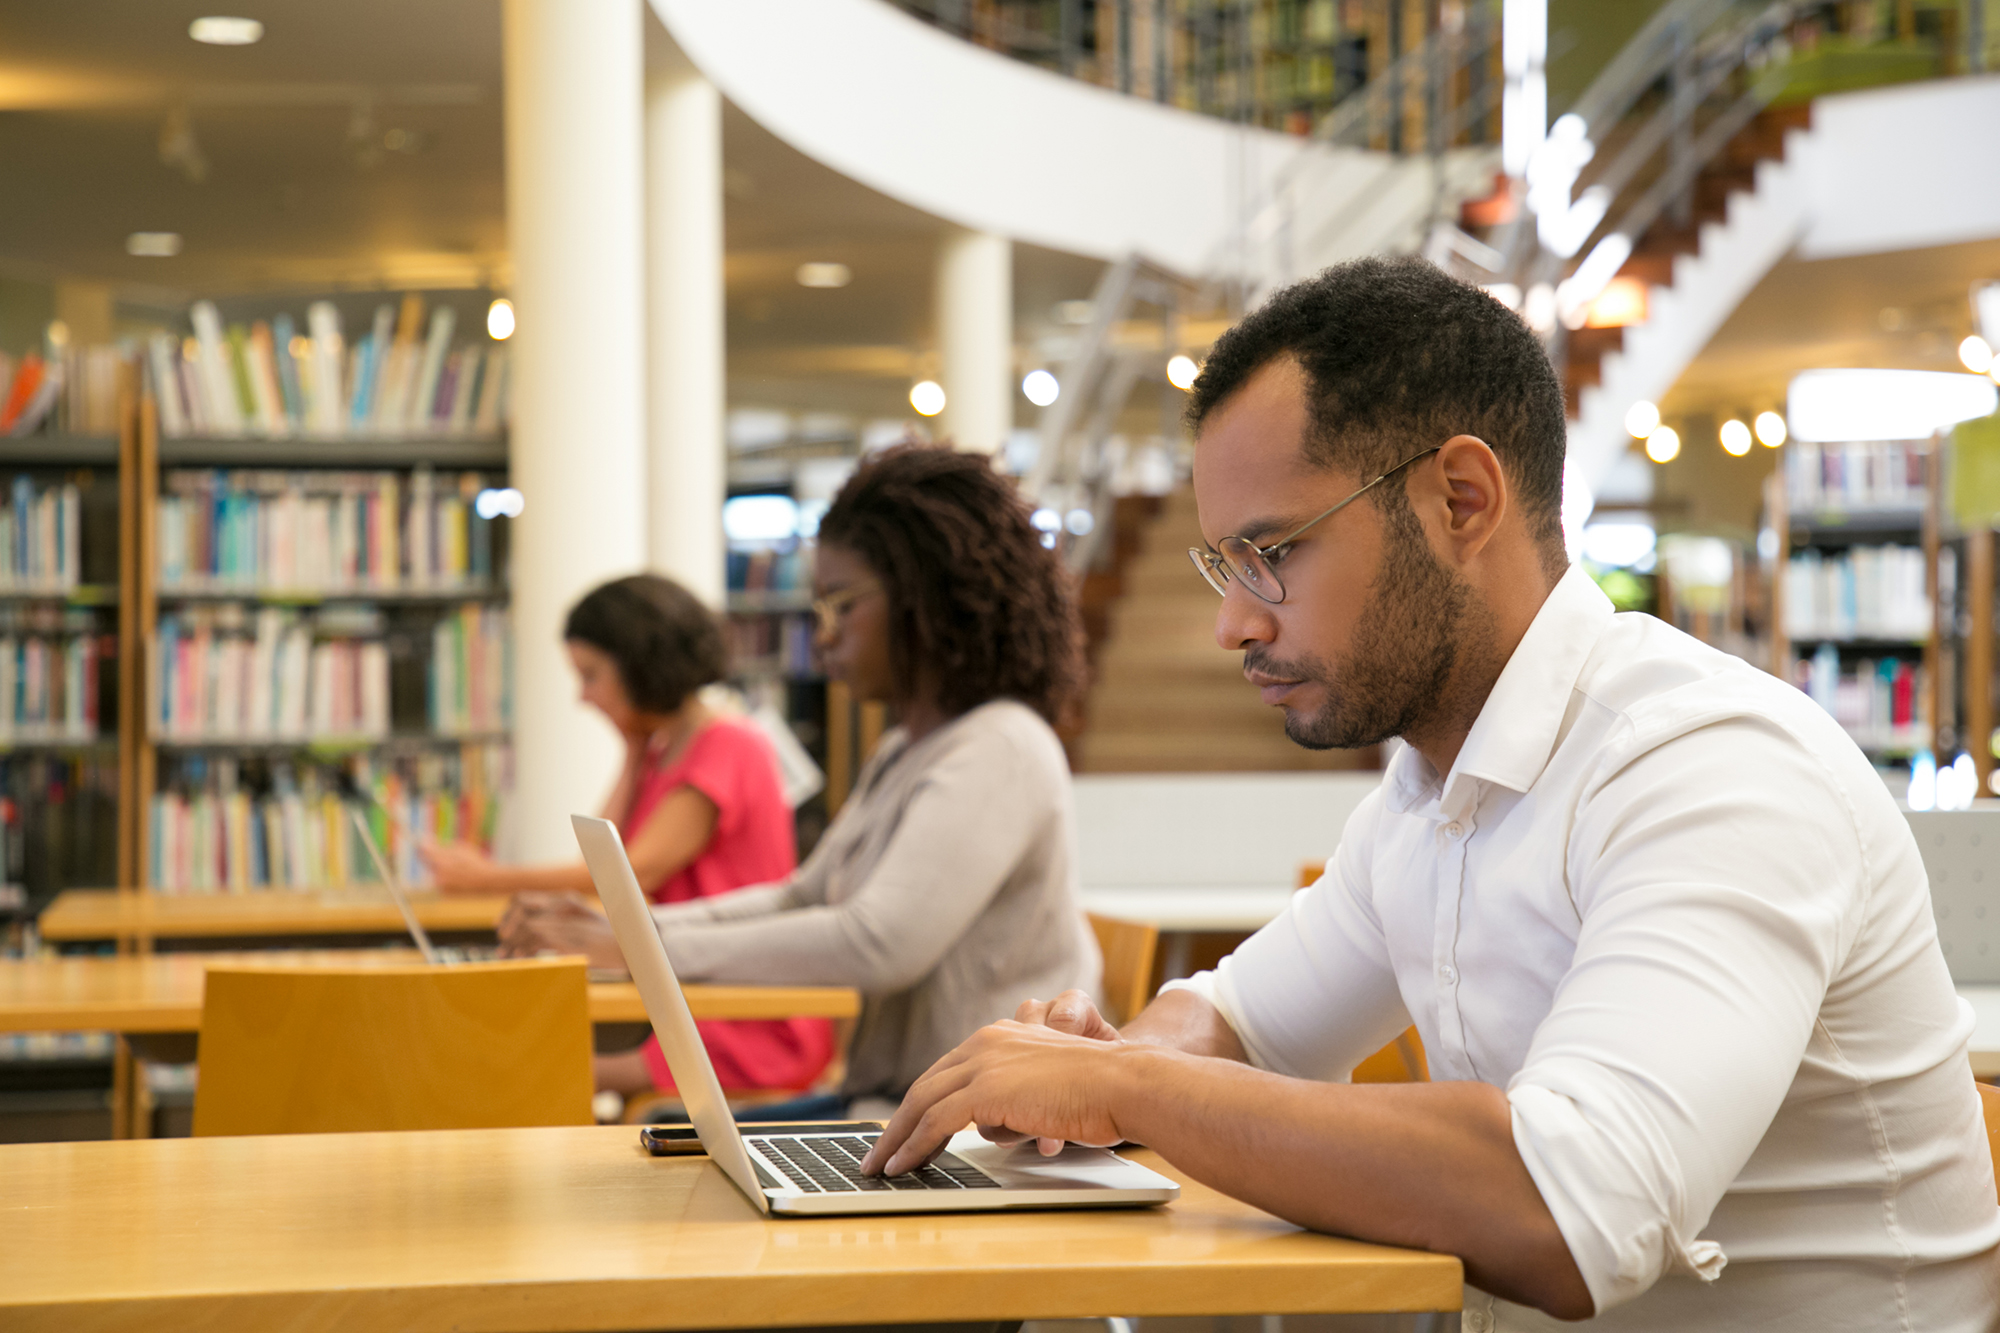 A student is seen studying in the library.